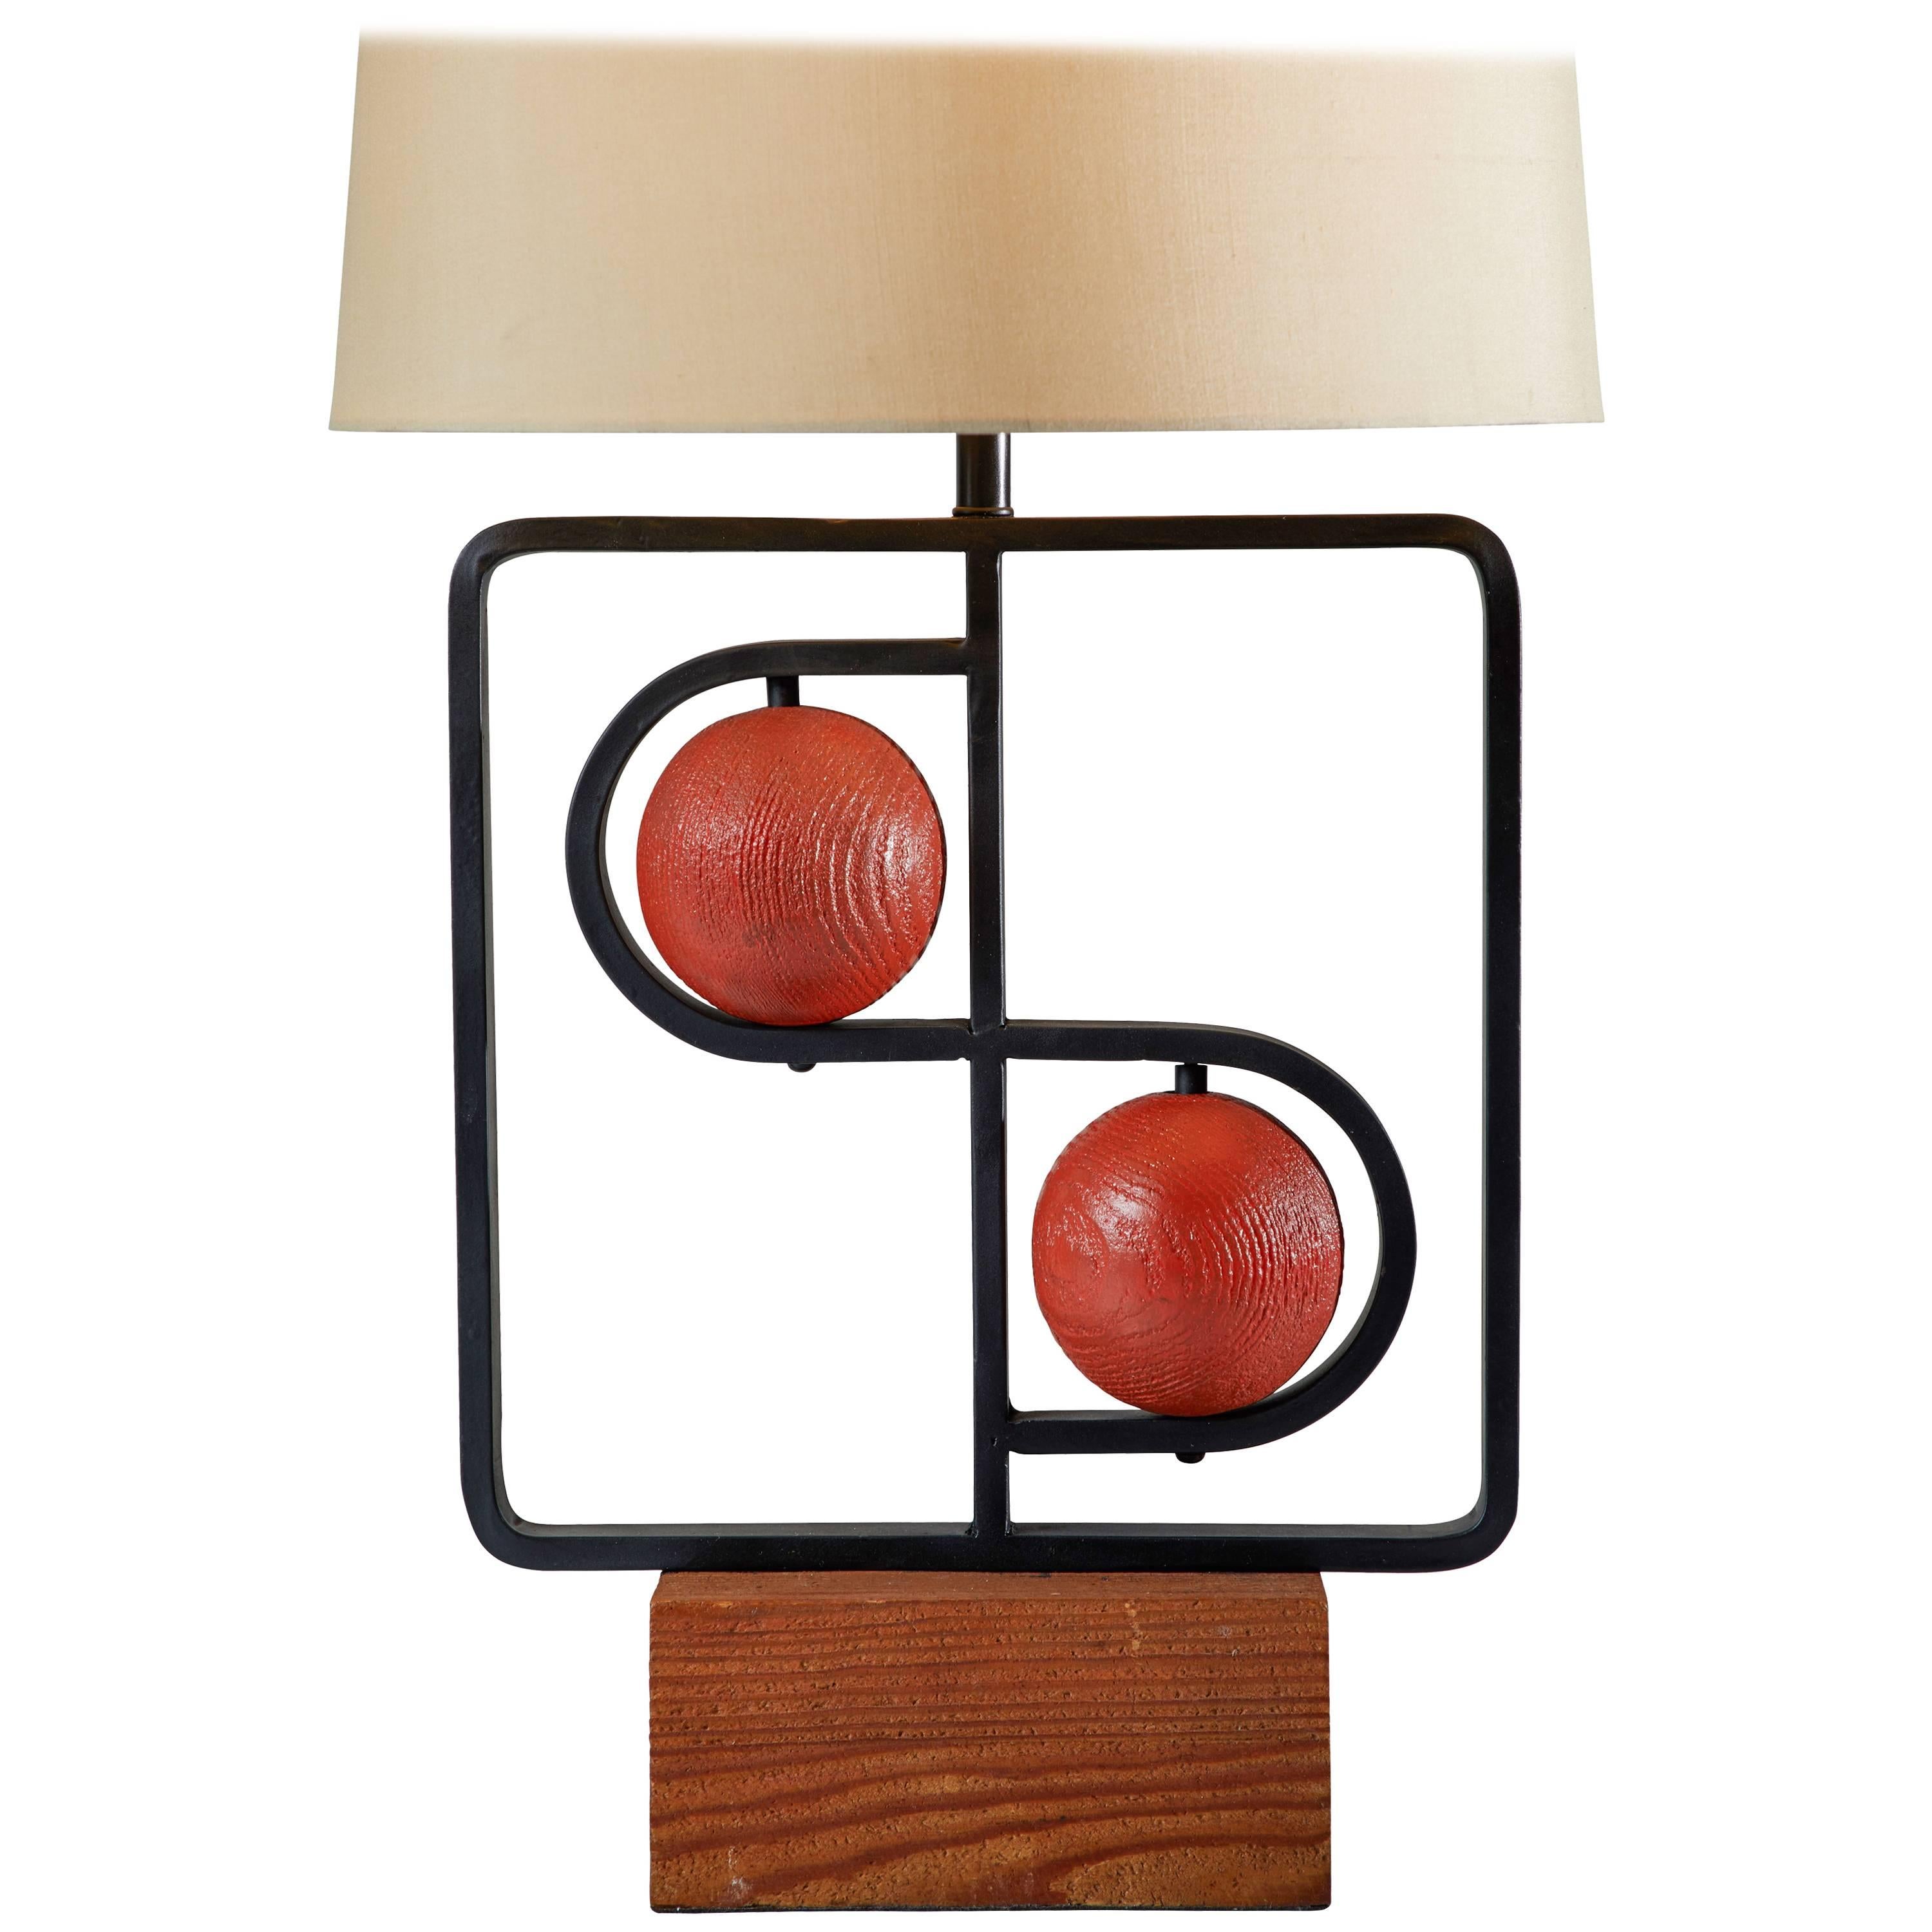 "Double D" Table Lamp by Harry Lawenda for Mutual Sunset Lamp Co.